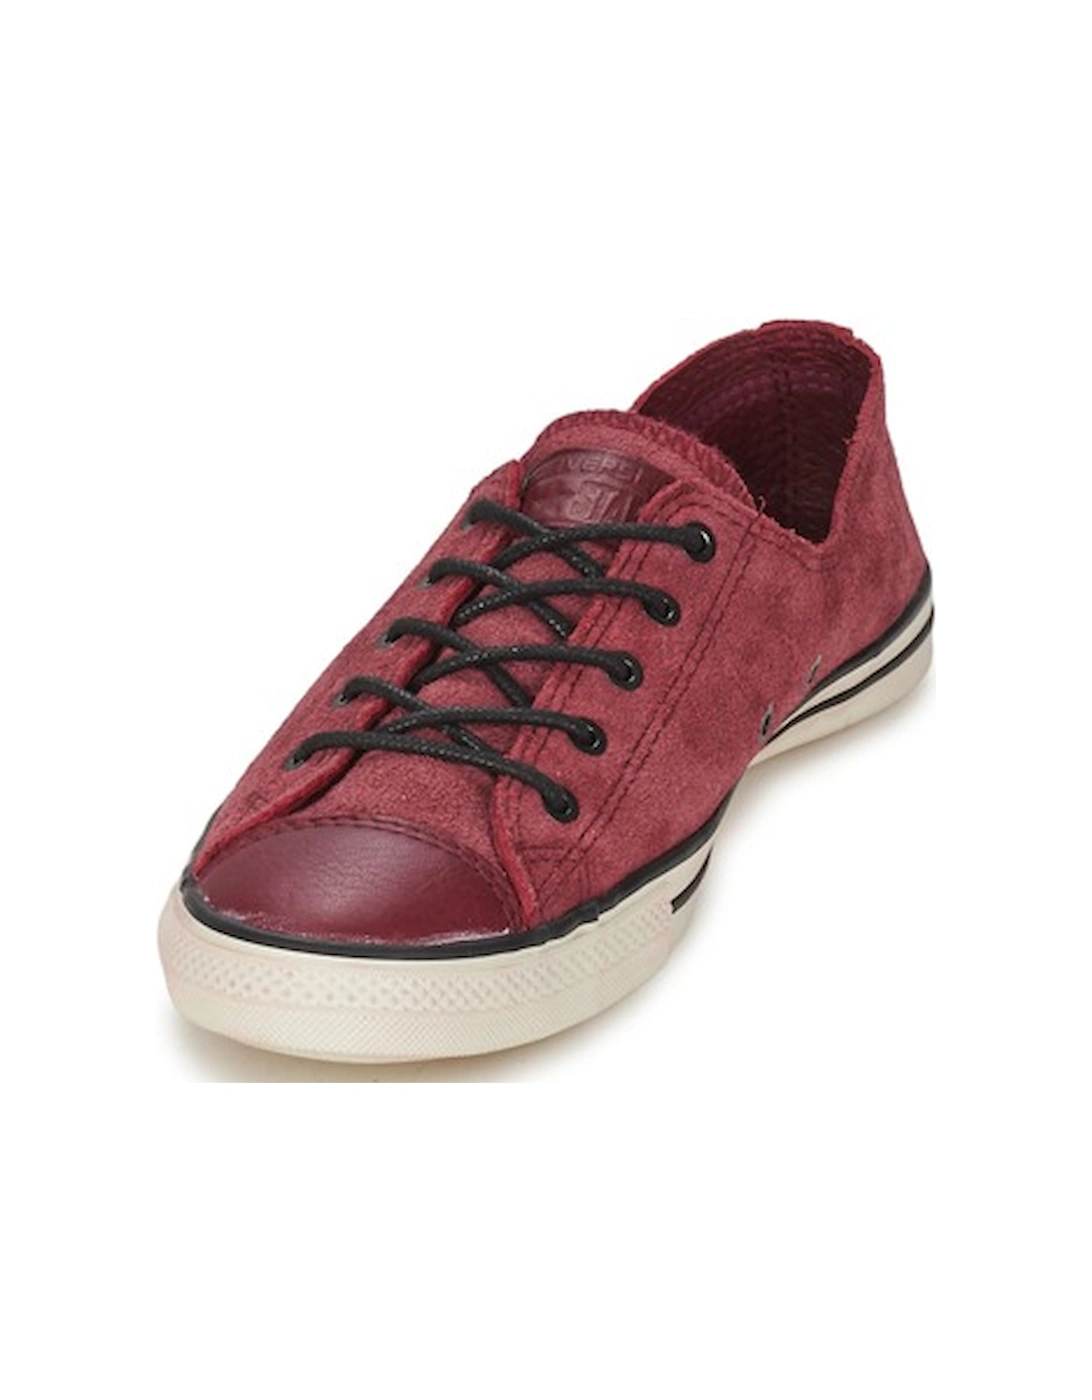 ALL STAR FANCY LEATHER OX